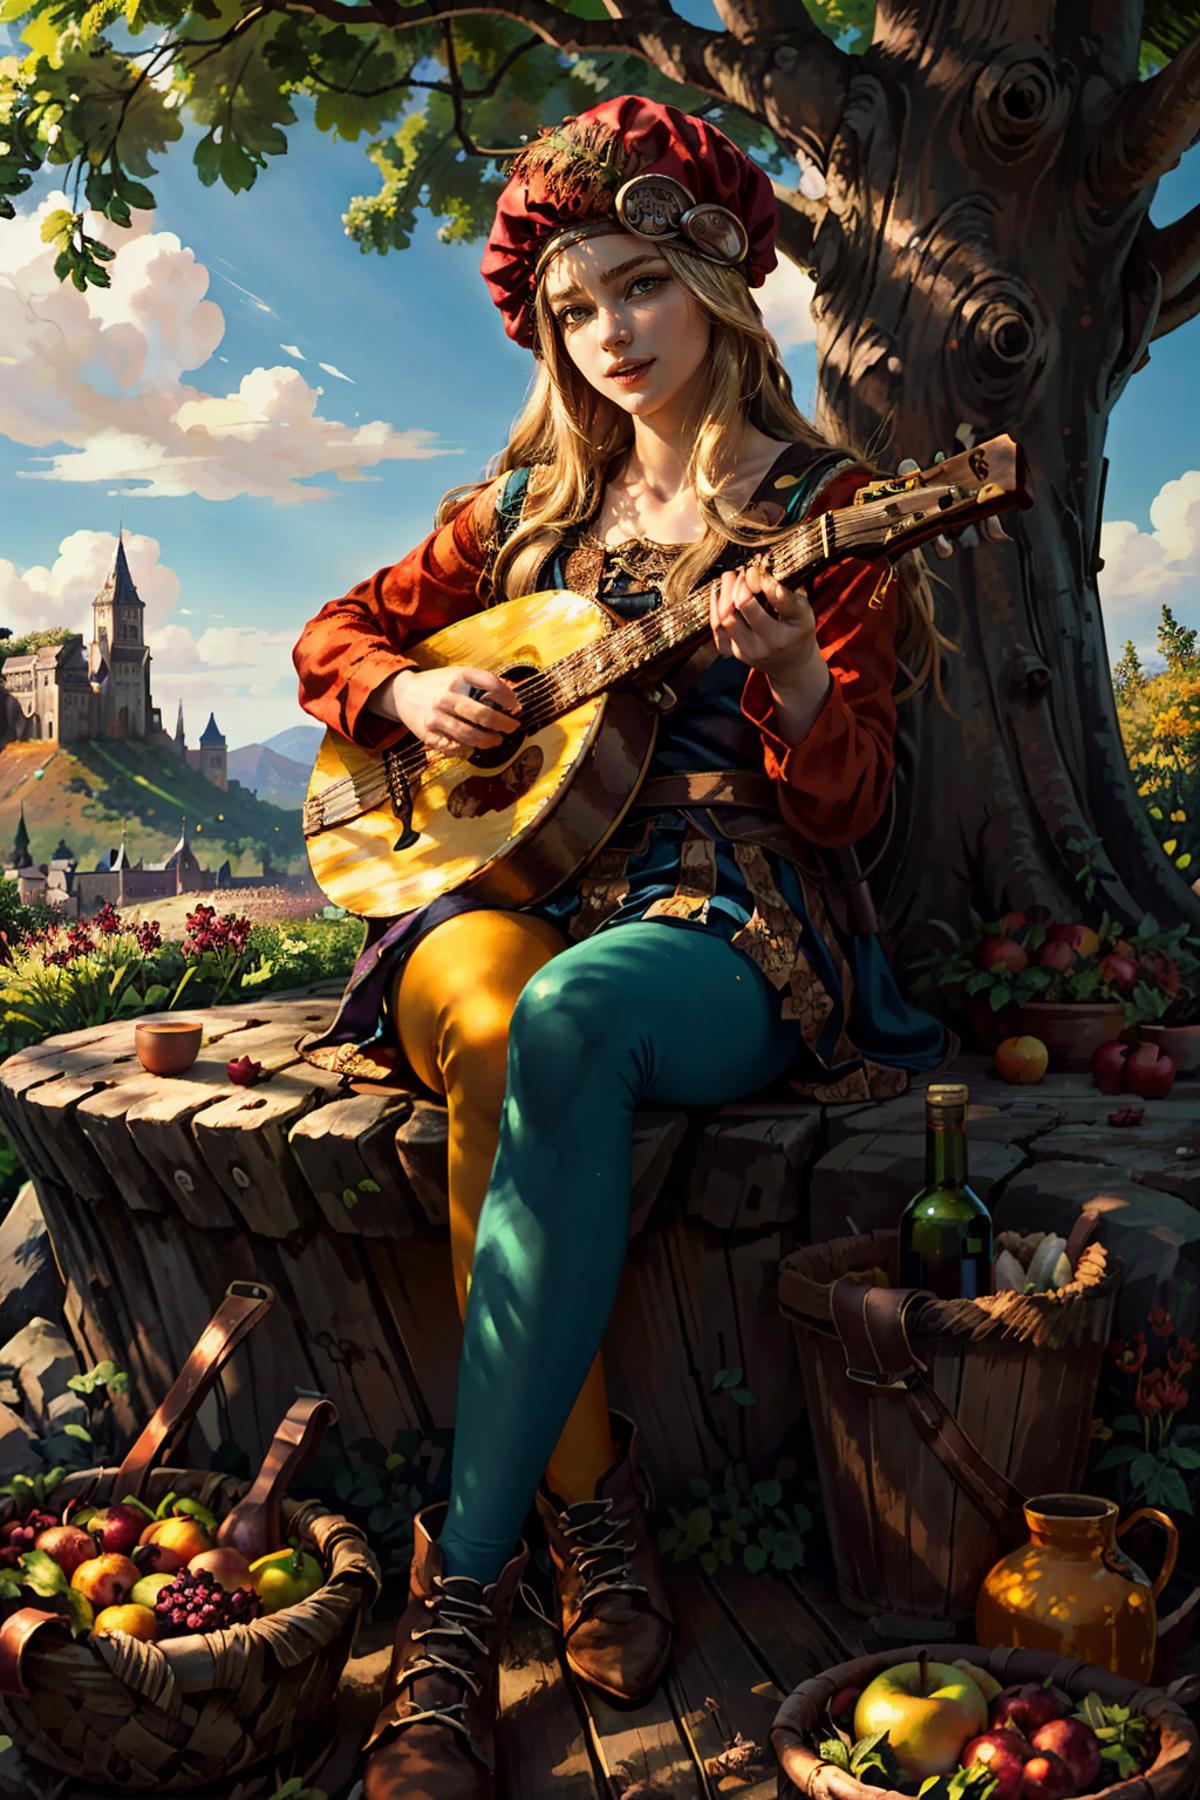 Priscilla from The Witcher 3 image by BloodRedKittie